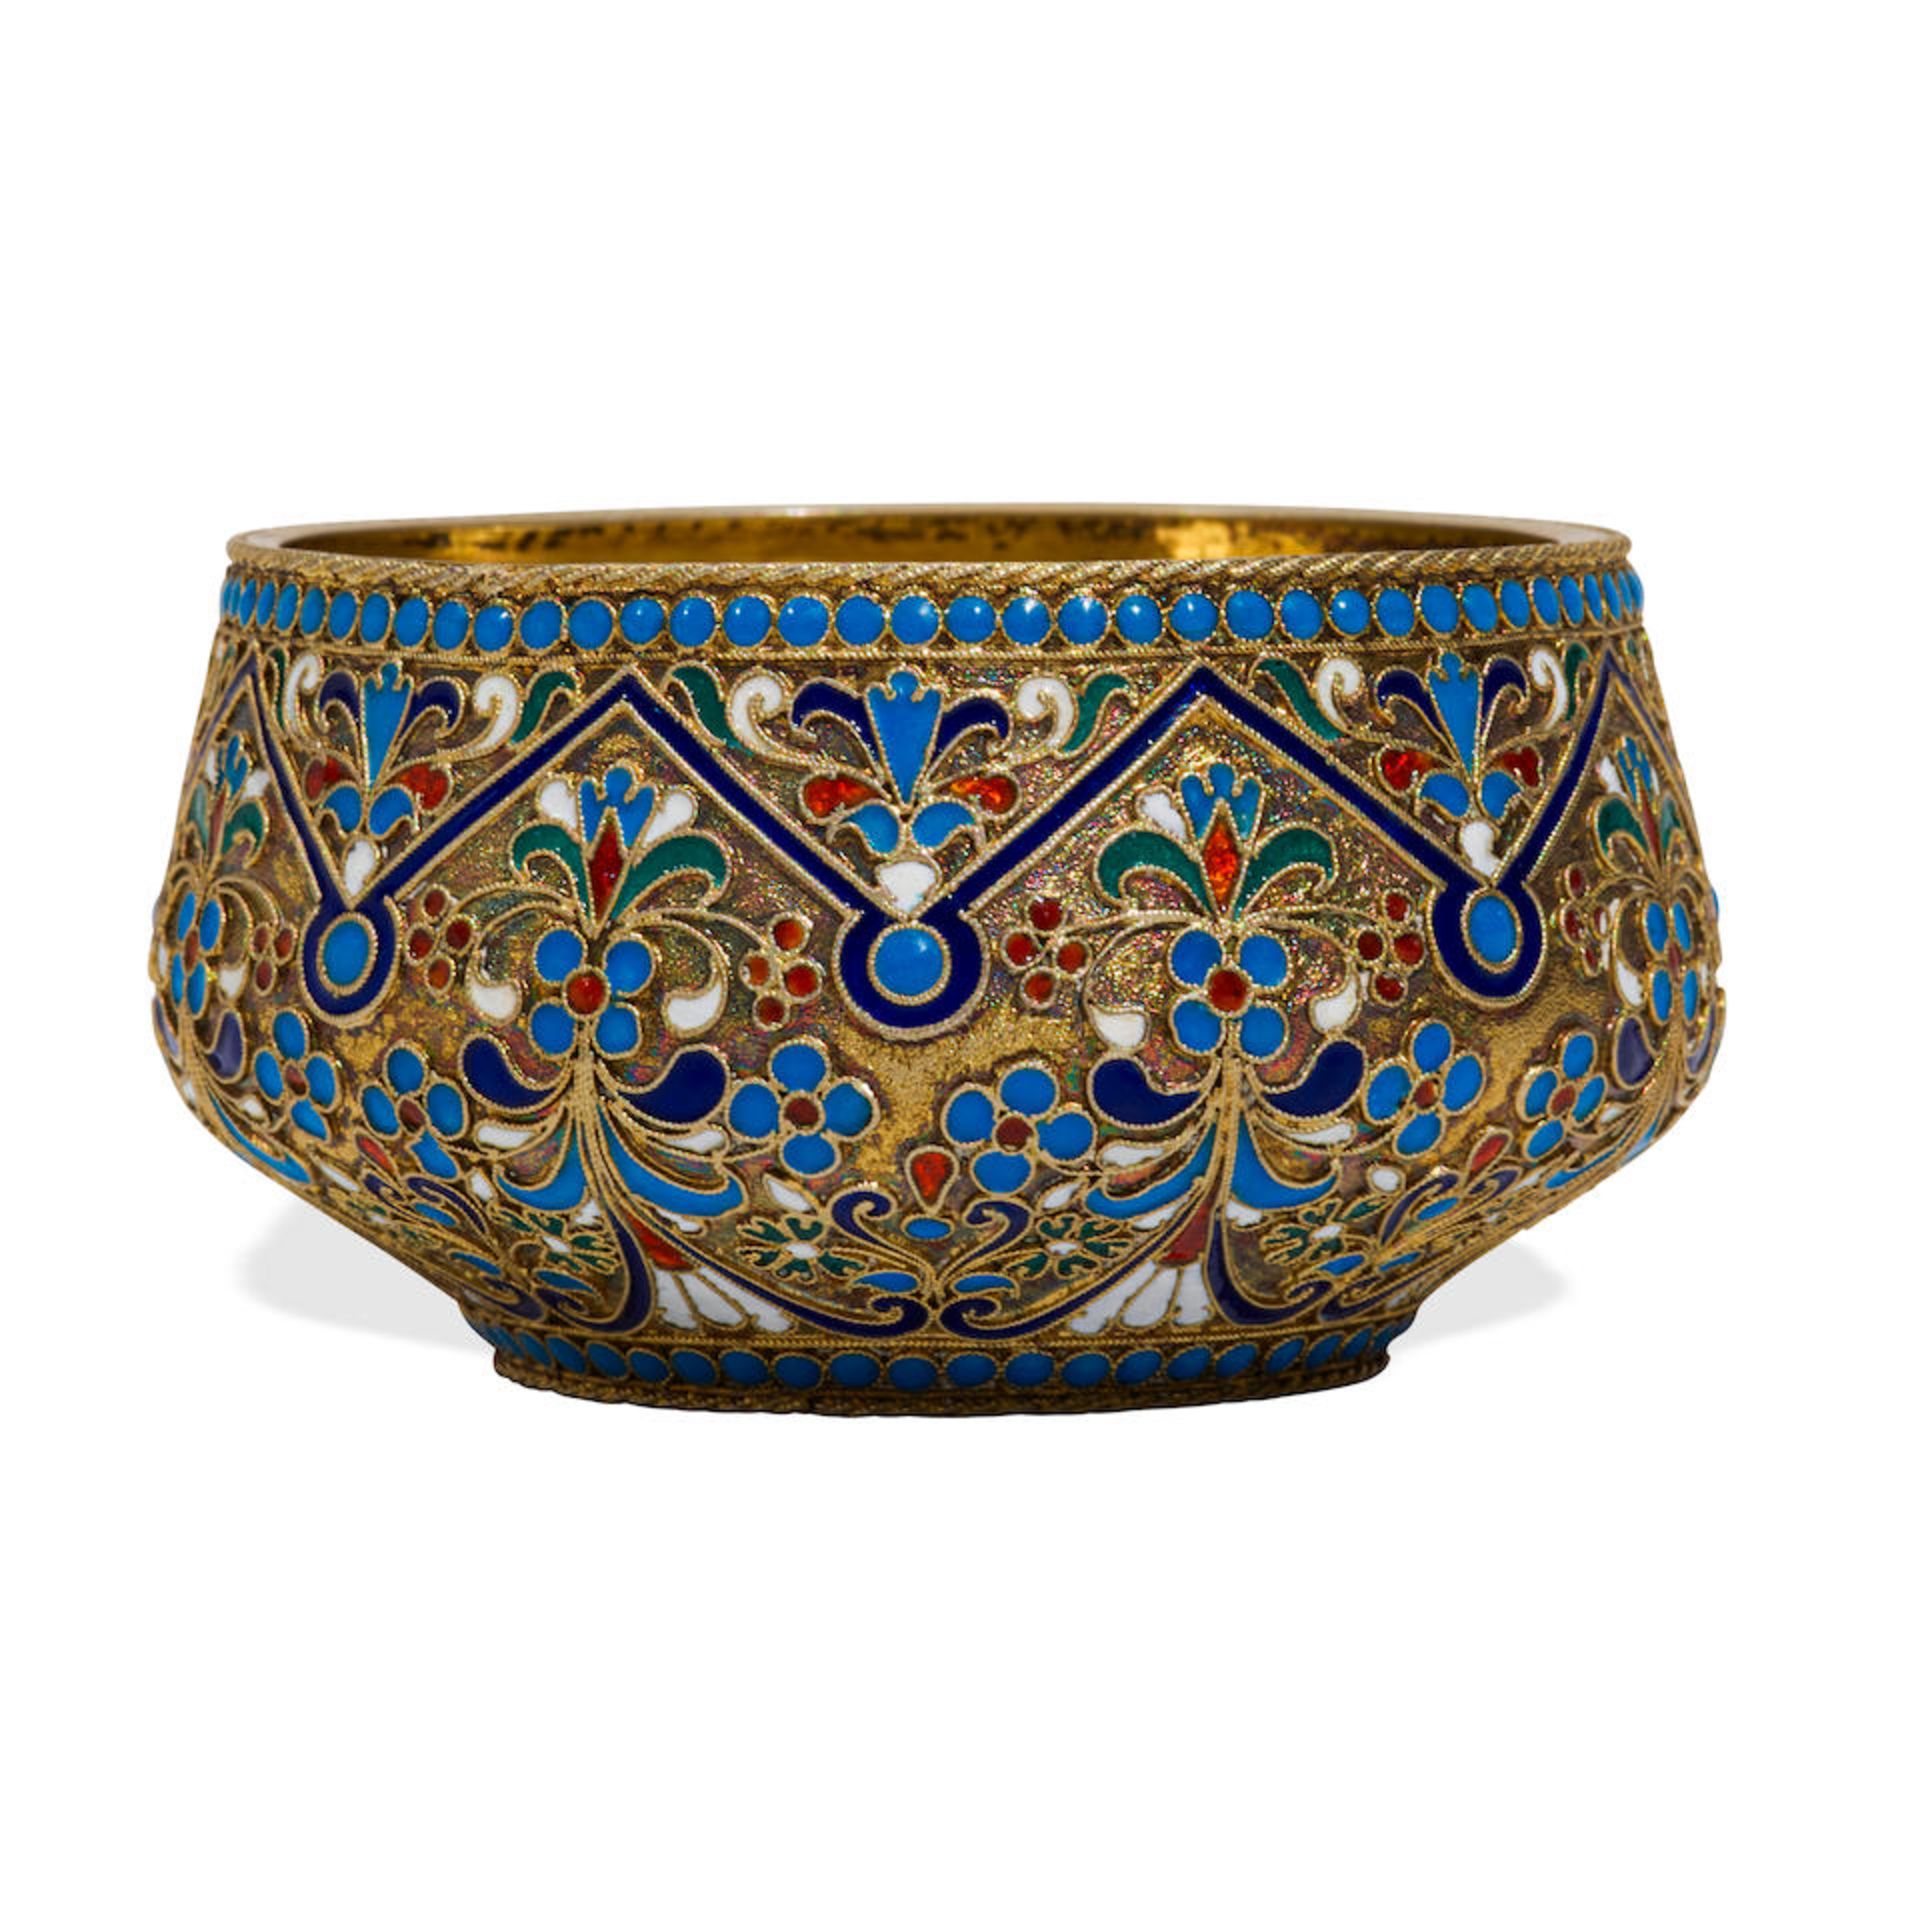 A RUSSIAN ENAMEL AND 84 SILVER-GILT SMALL BOWL Moscow, 1882-1899